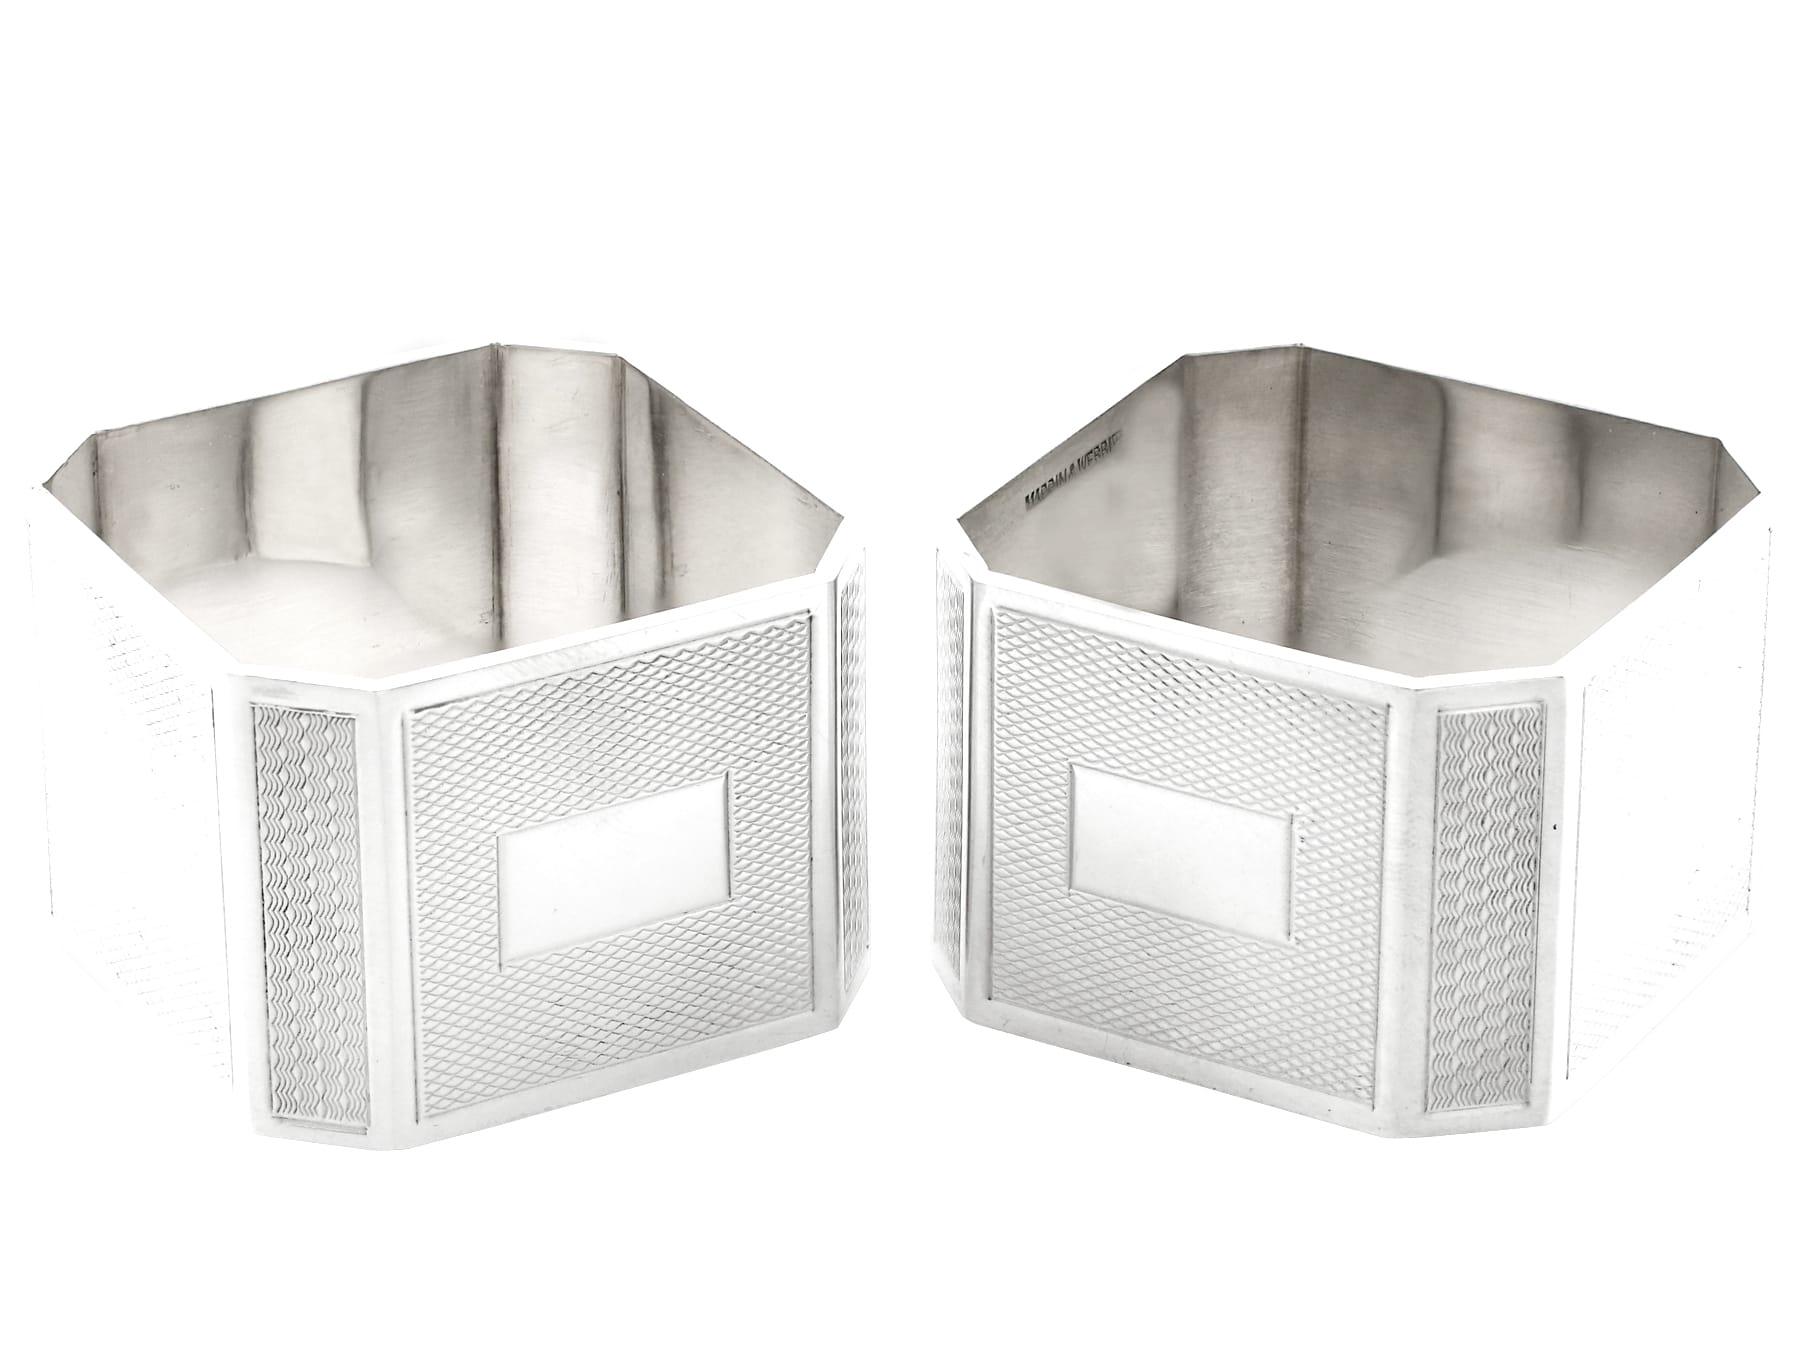 An exceptional, fine and impressive pair of antique George VI English sterling silver Art Deco napkin rings, boxed, part of our dining silverware collection.

These exceptional antique English sterling silver napkin rings have a square form with